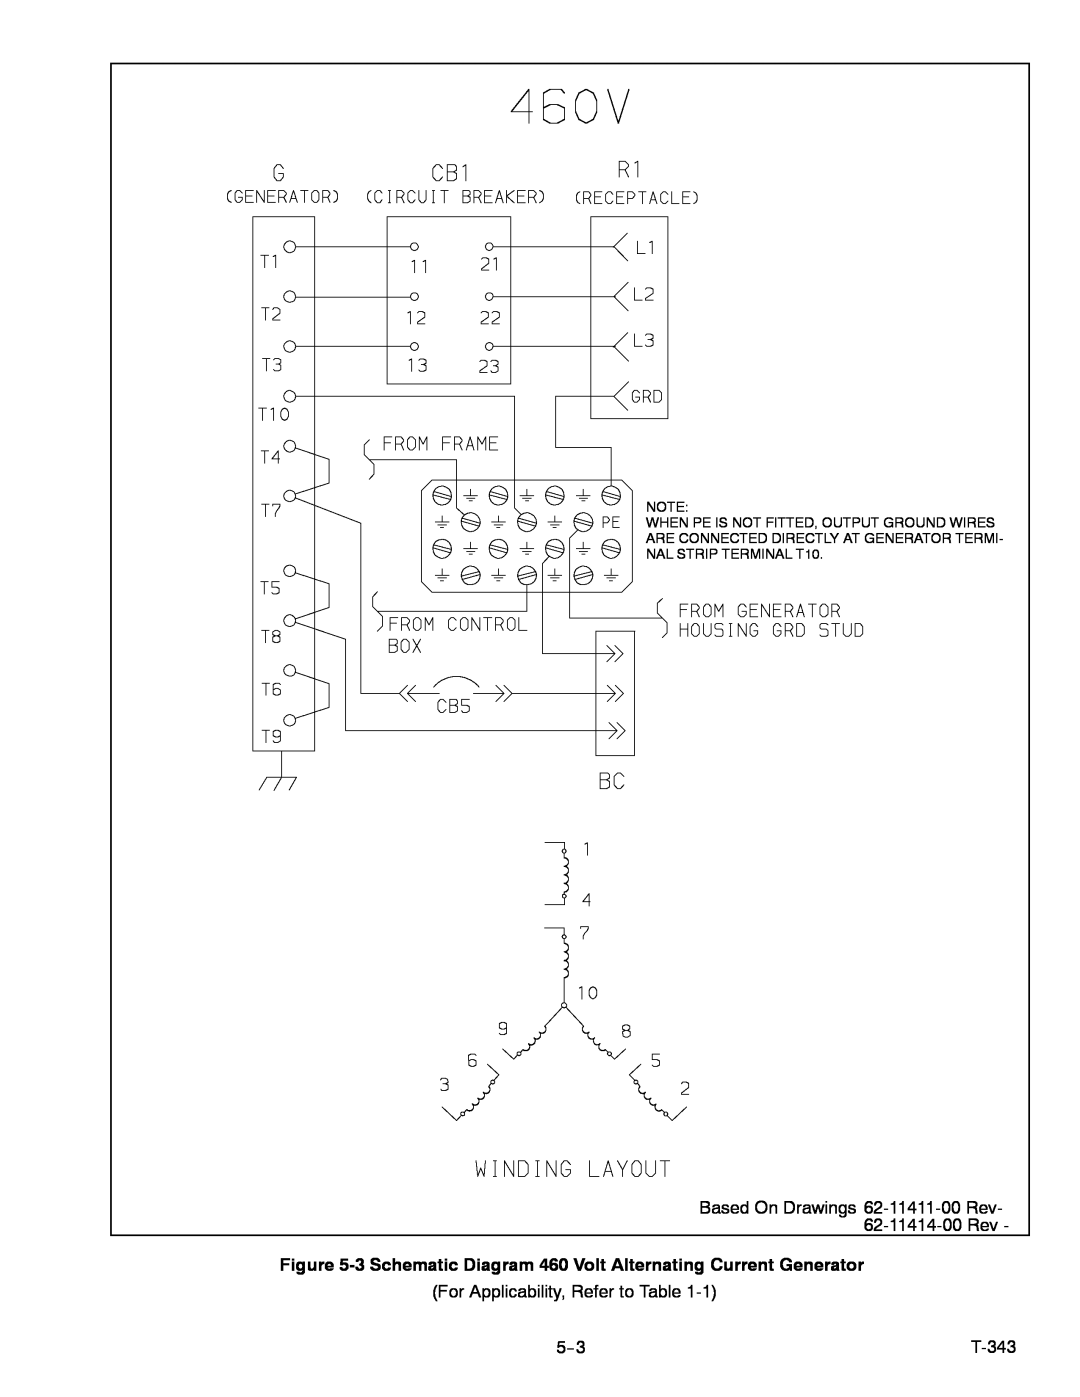 Carrier 69UG15 3 Schematic Diagram 460 Volt Alternating Current Generator, When Pe Is Not Fitted, Output Ground Wires 